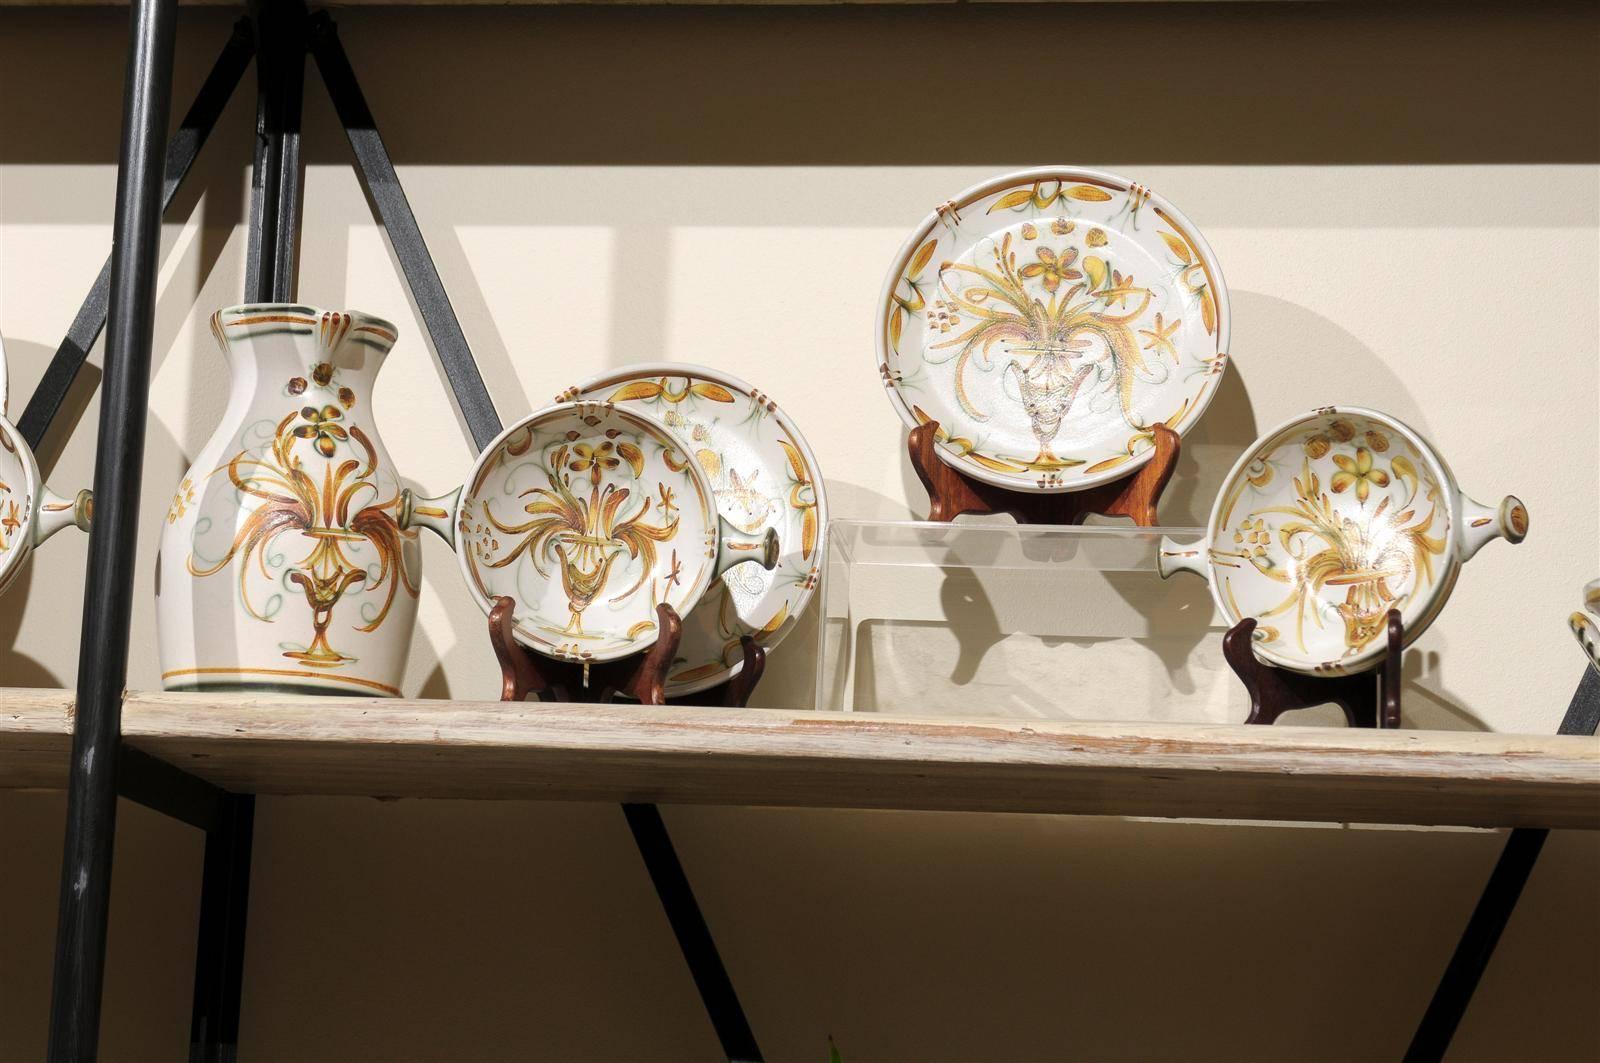 Set of Midcentury Quimper Tableware in a Gold and Green Pattern, circa 1970 In Good Condition For Sale In Atlanta, GA